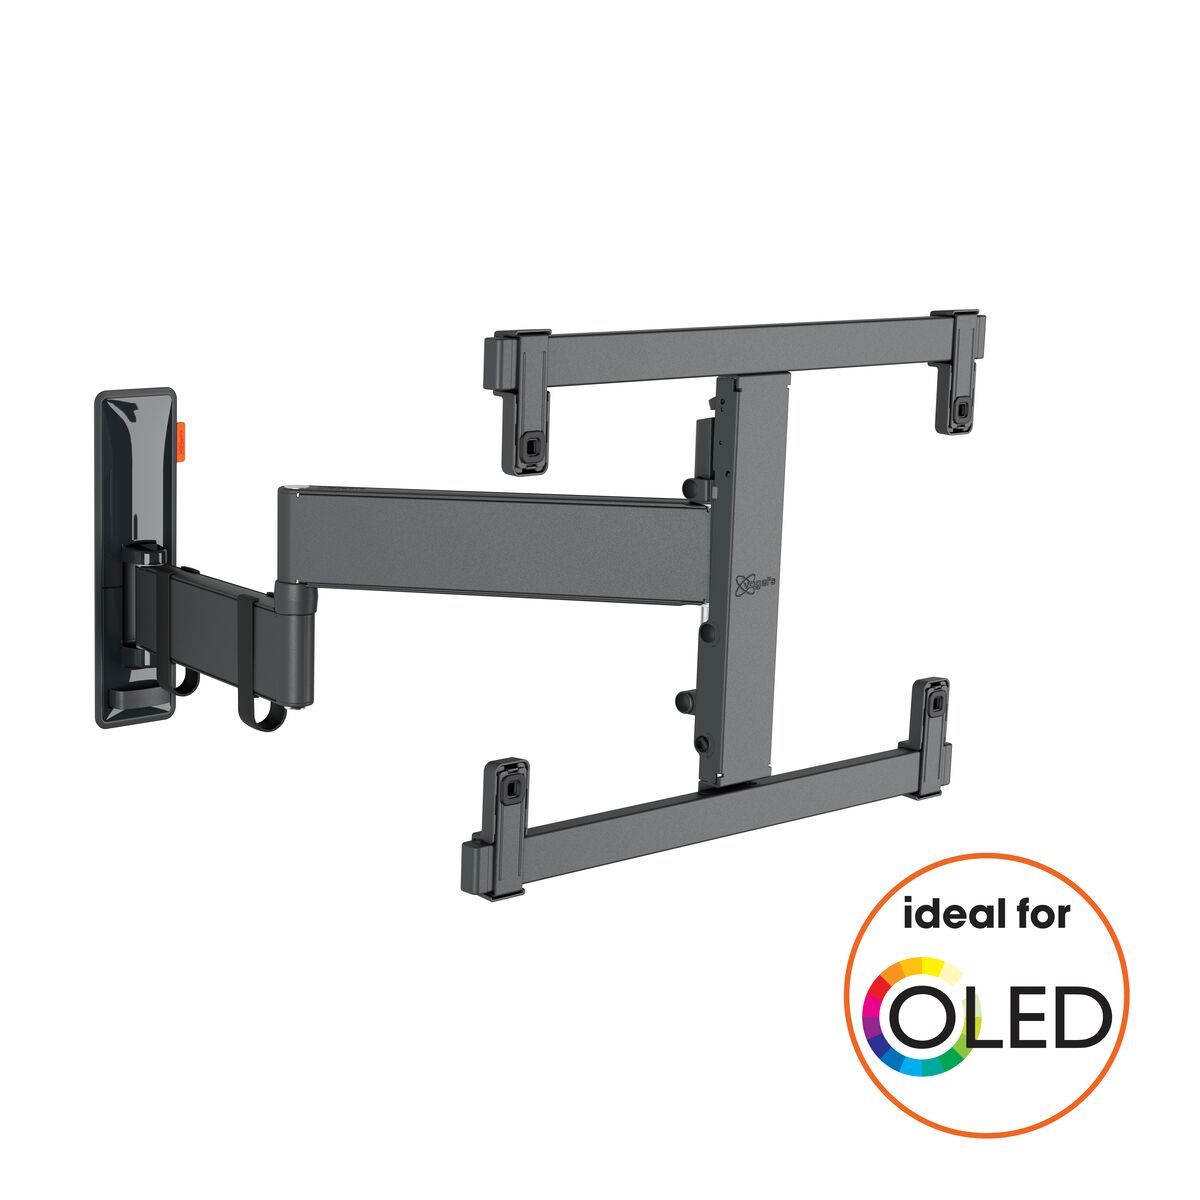 Vogel's TVM 3463 Full-Motion TV Wall Mount - Suitable for 32 up to 65 inch TVs - Full motion (up to 180°) swivel - Tilt up to 20° - Promo